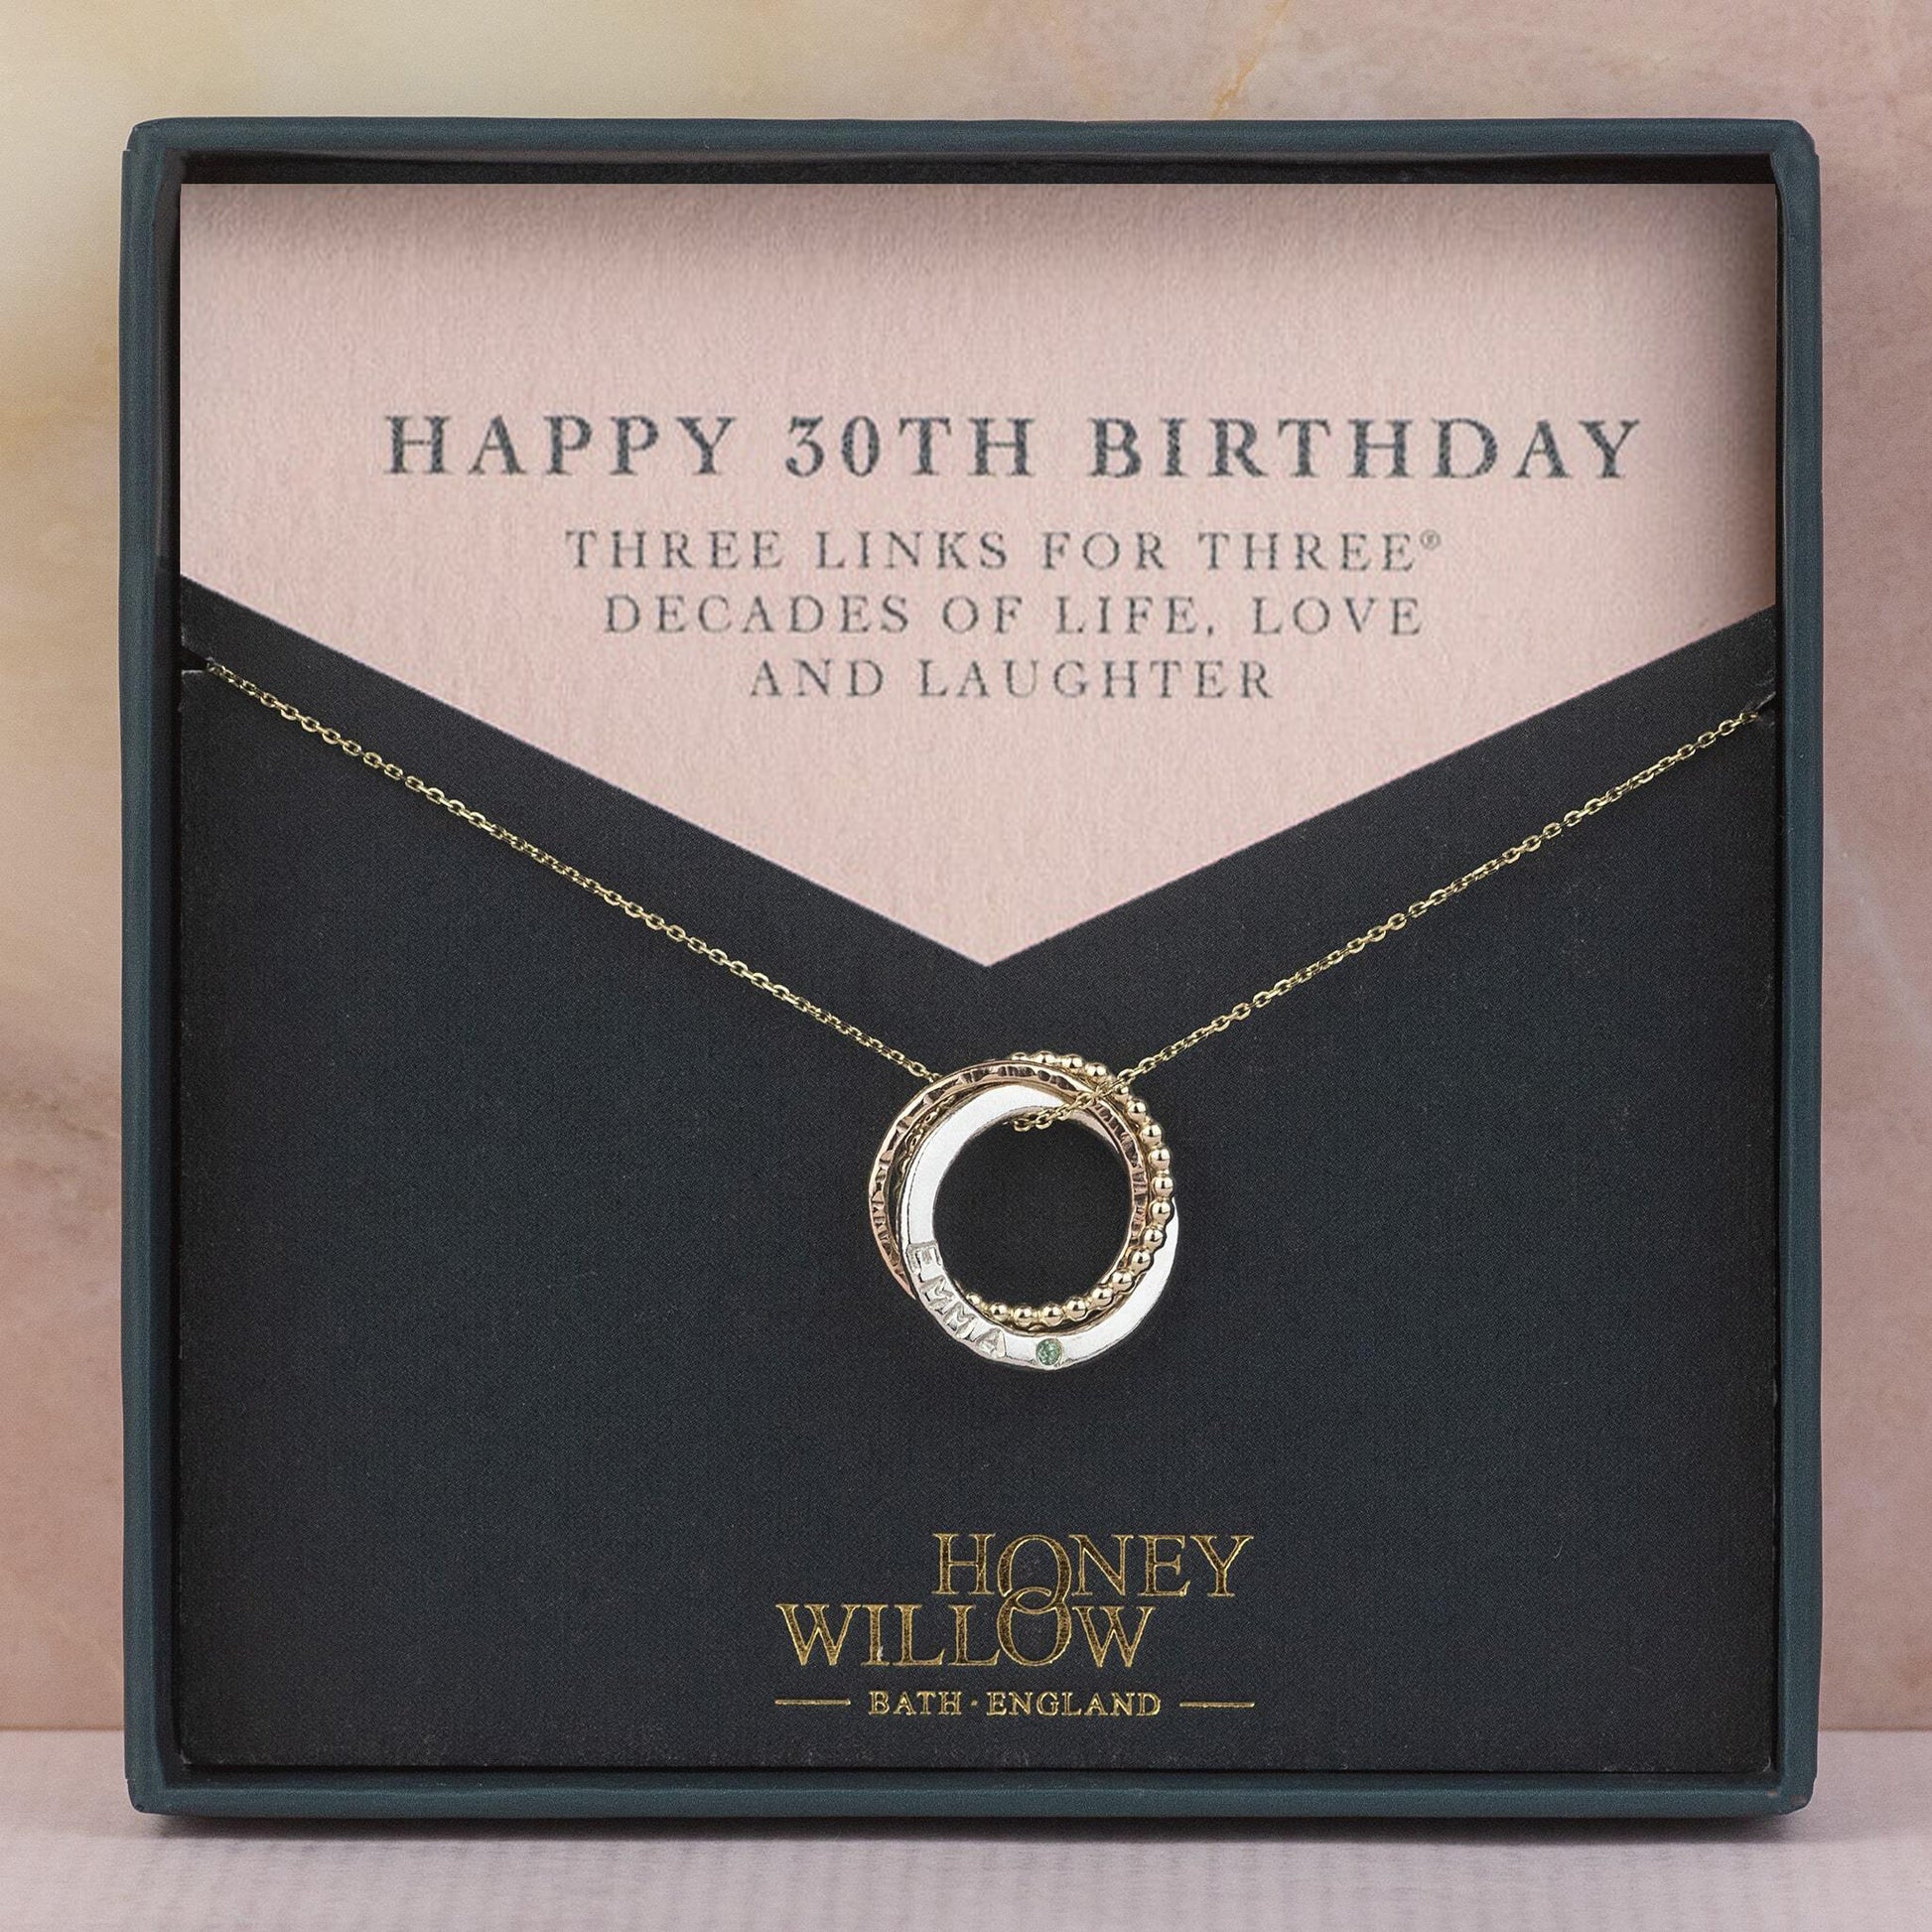 9kt Gold Personalised 30th Birthday Birthstone Necklace -  The Original 3 Links for 3 Decades Necklace - Recycled Gold, Rose Gold & Silver